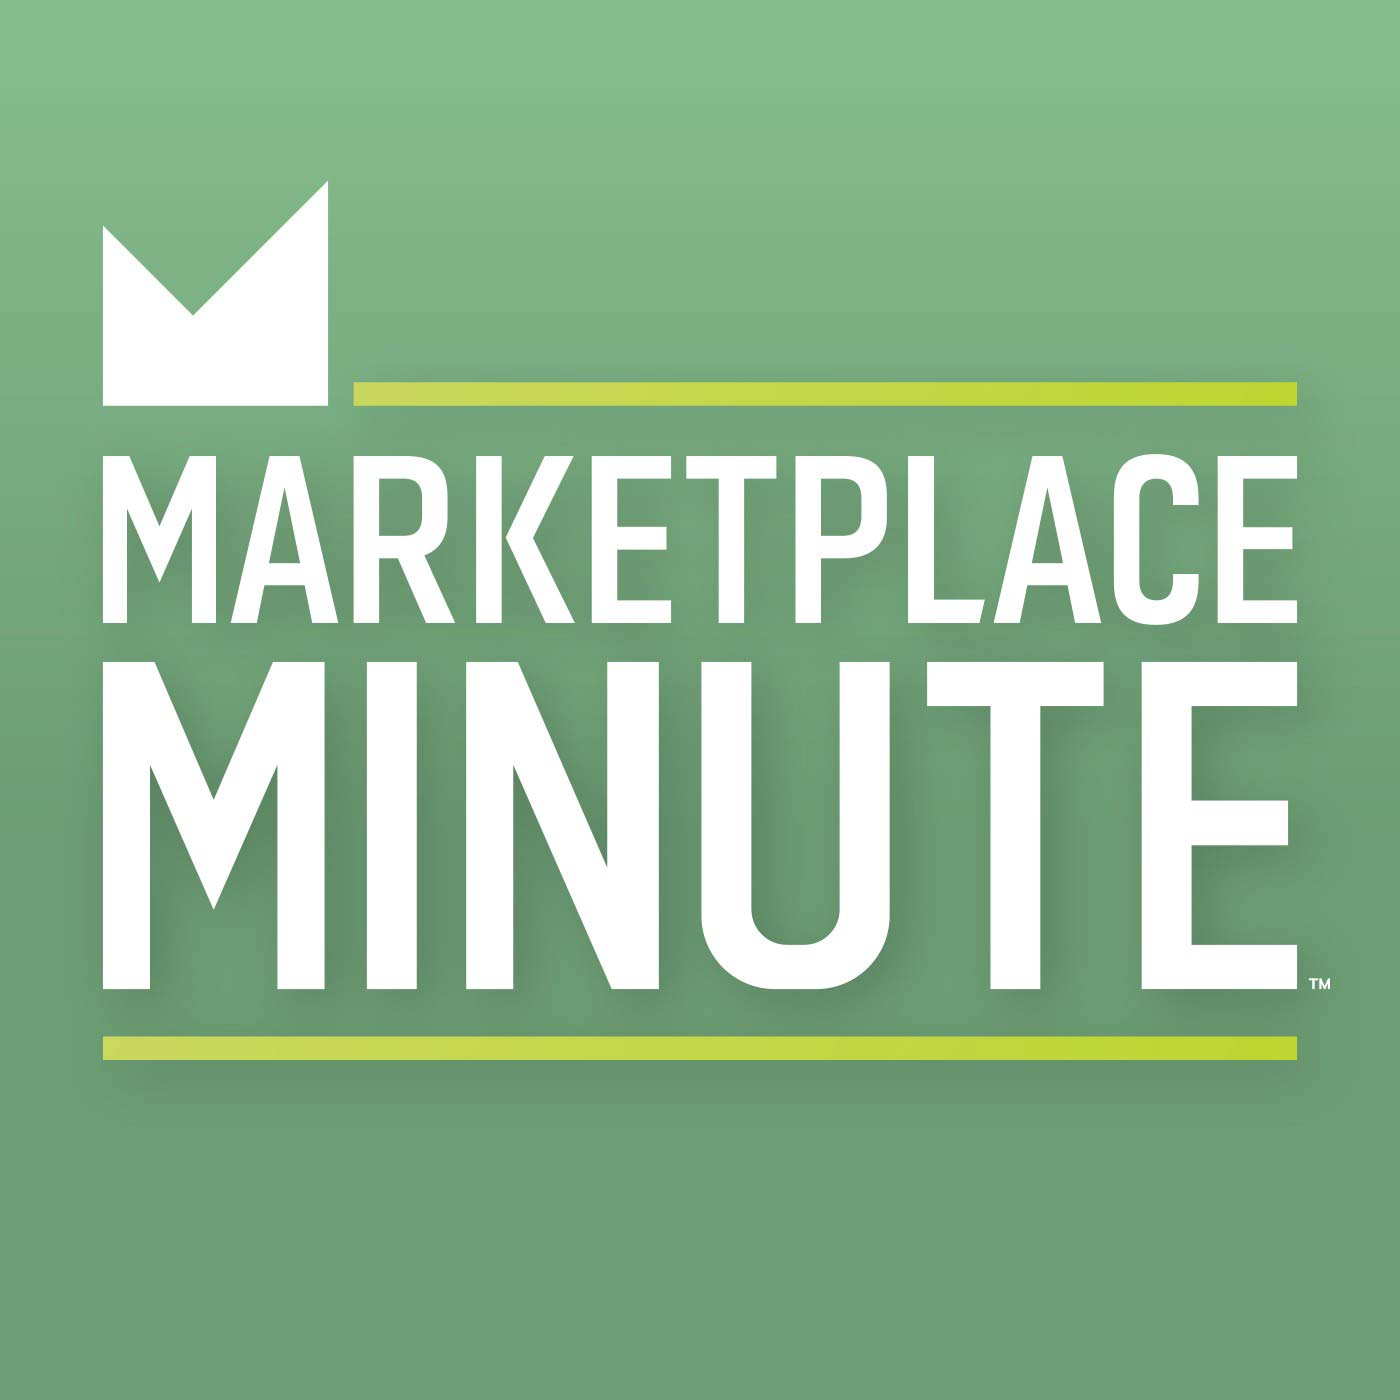 MARKETPLACE AND WESTWOOD ONE PARTNER TO LAUNCH ‘MARKETPLACE MINUTE’